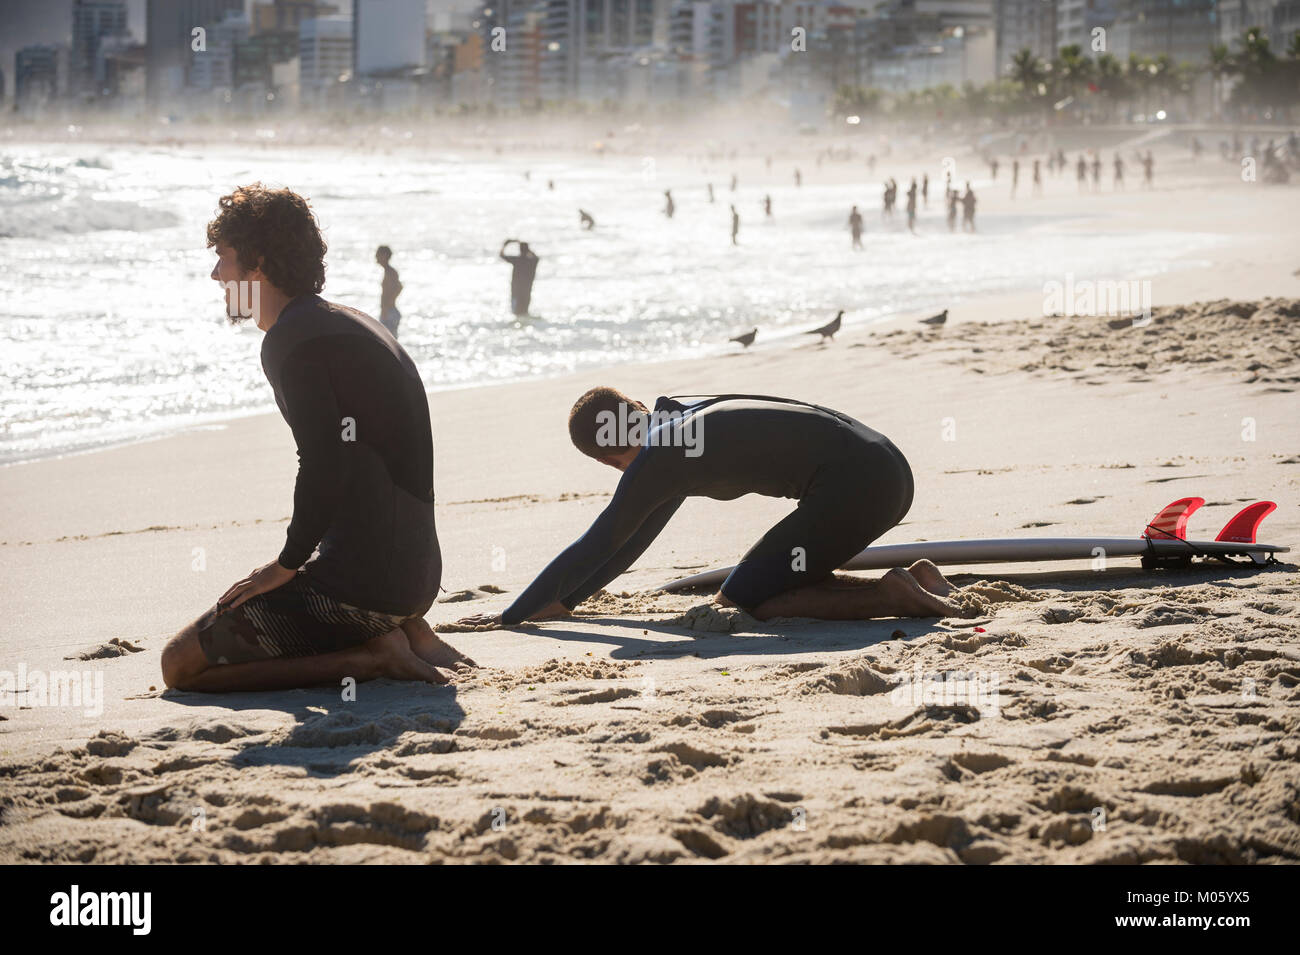 RIO DE JANEIRO - MARCH 20, 2017: Surfers stretch on the beach before heading into the waves at the surf break at Arpoador. Stock Photo